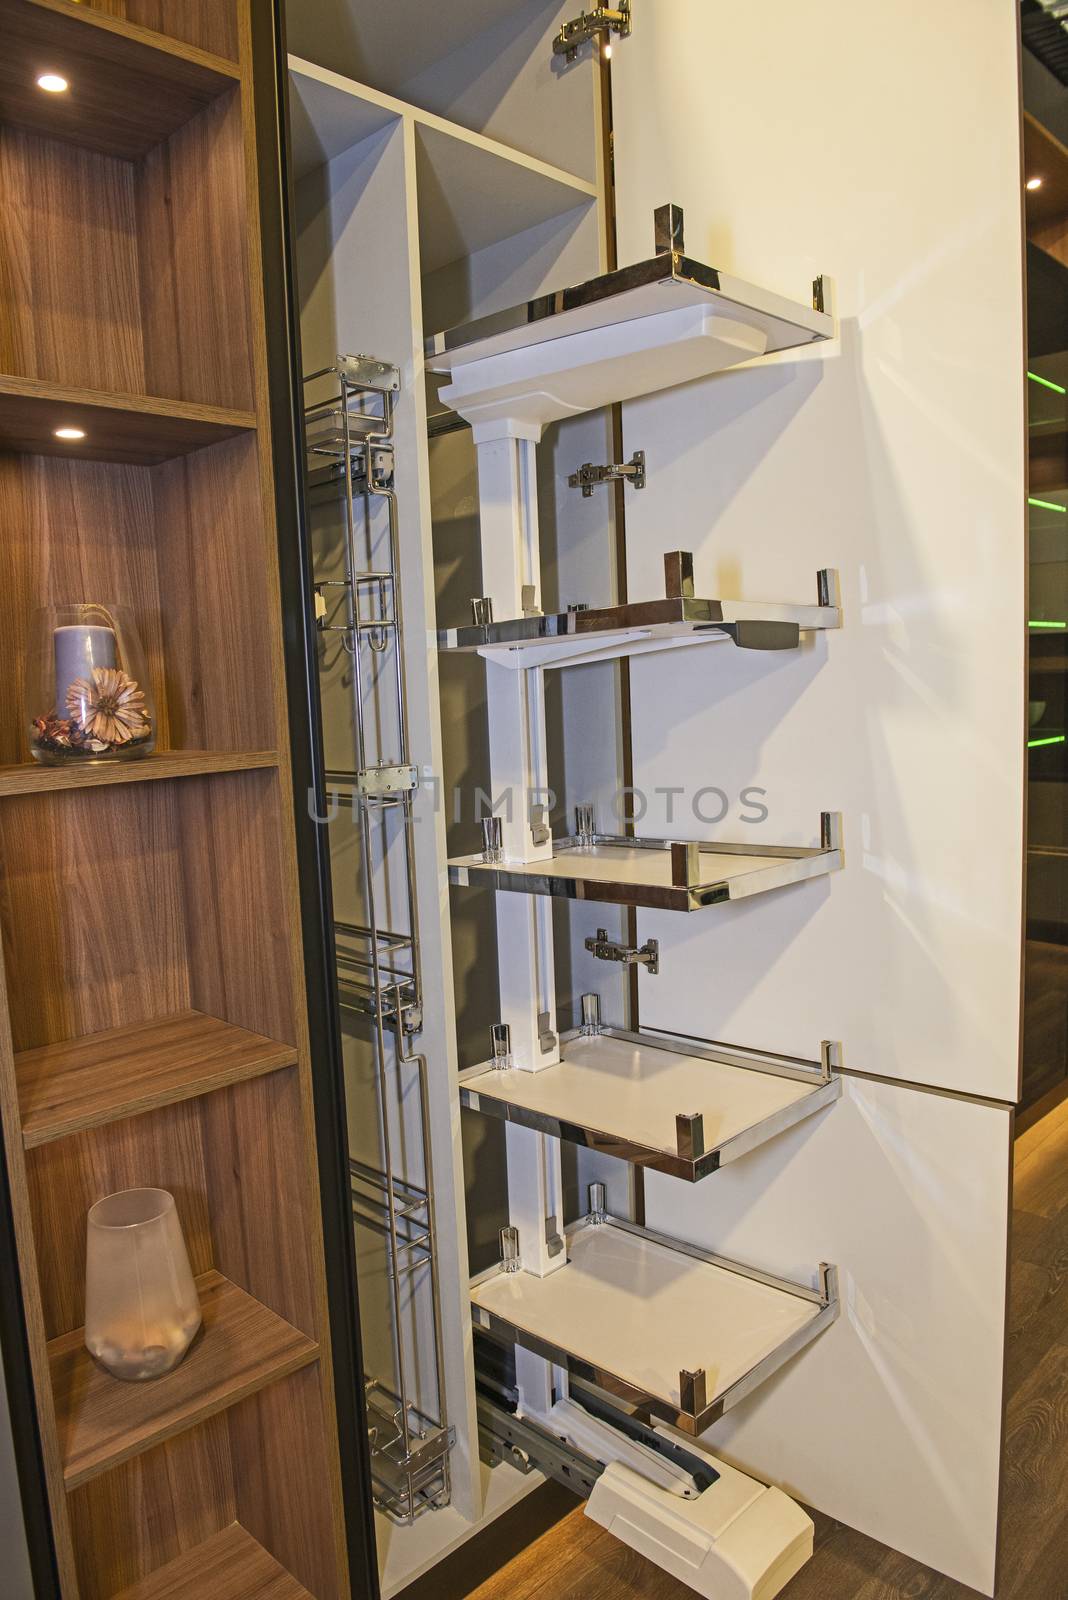 Interior design decor of kitchen in luxury apartment showing closeup detail of sliding cupboard unit with shelves